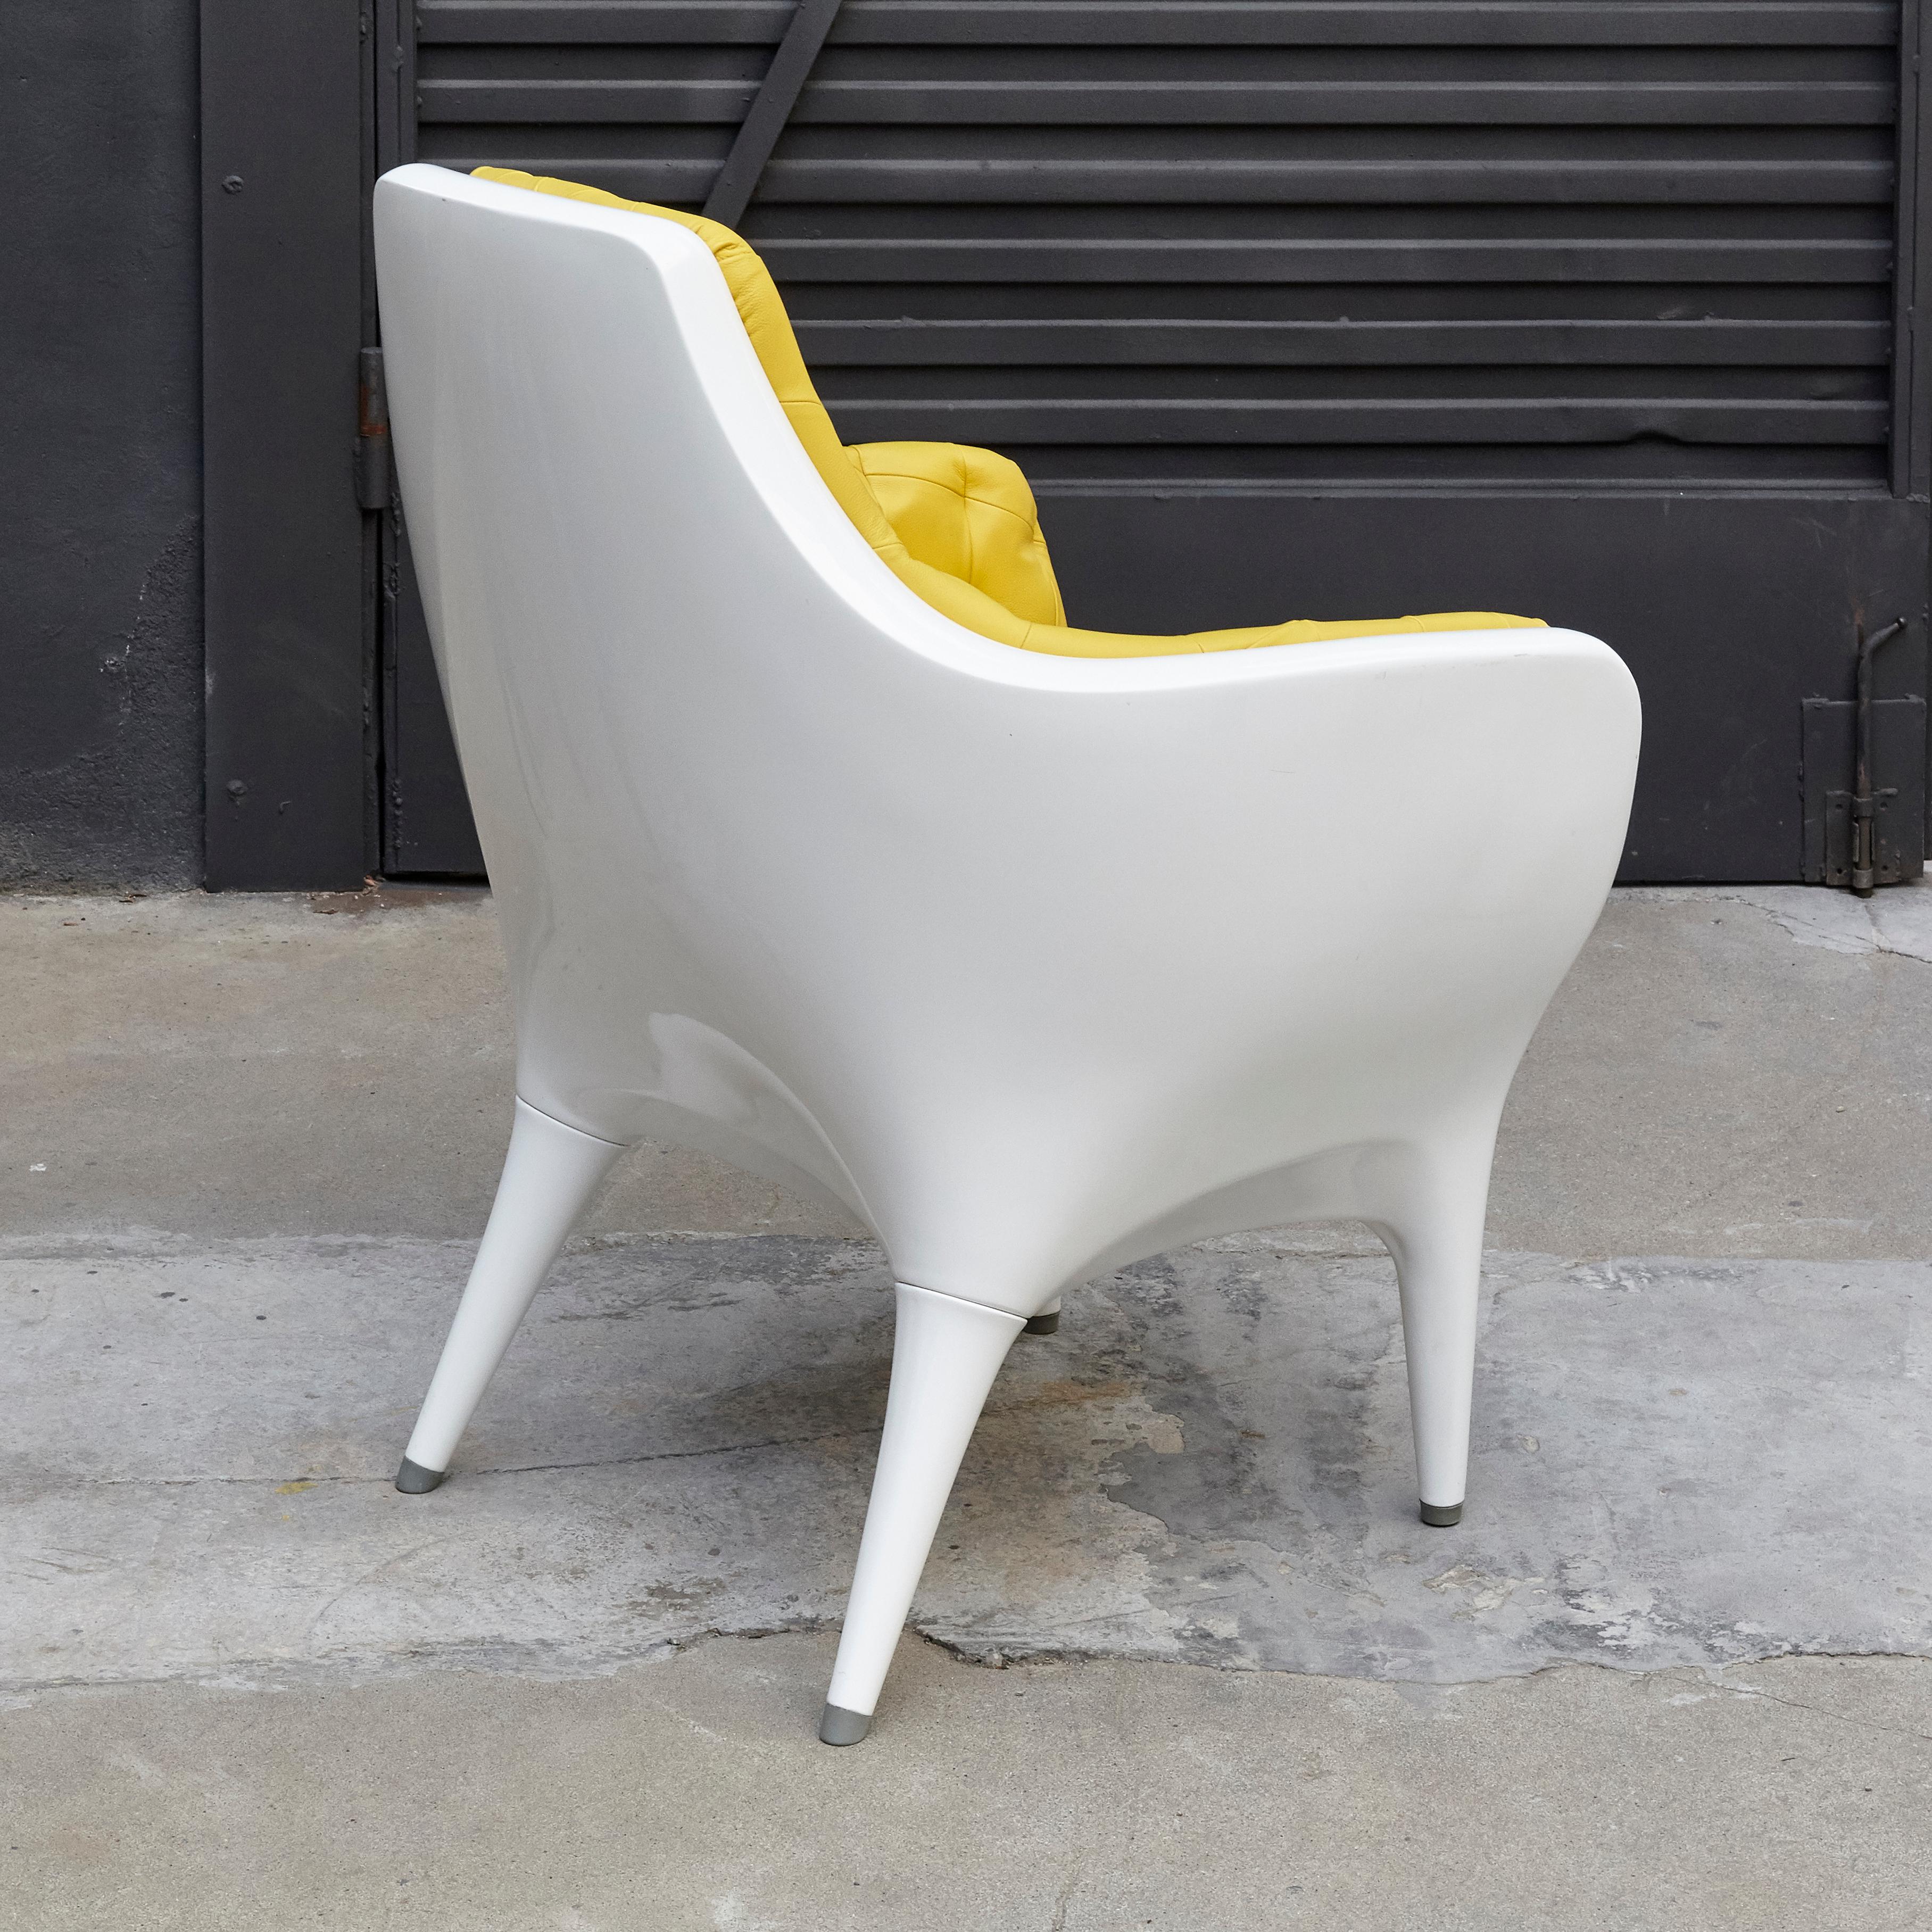 Spanish Jaime Hayon Contemporary Showtime Armchair Lacquered White and Yellow